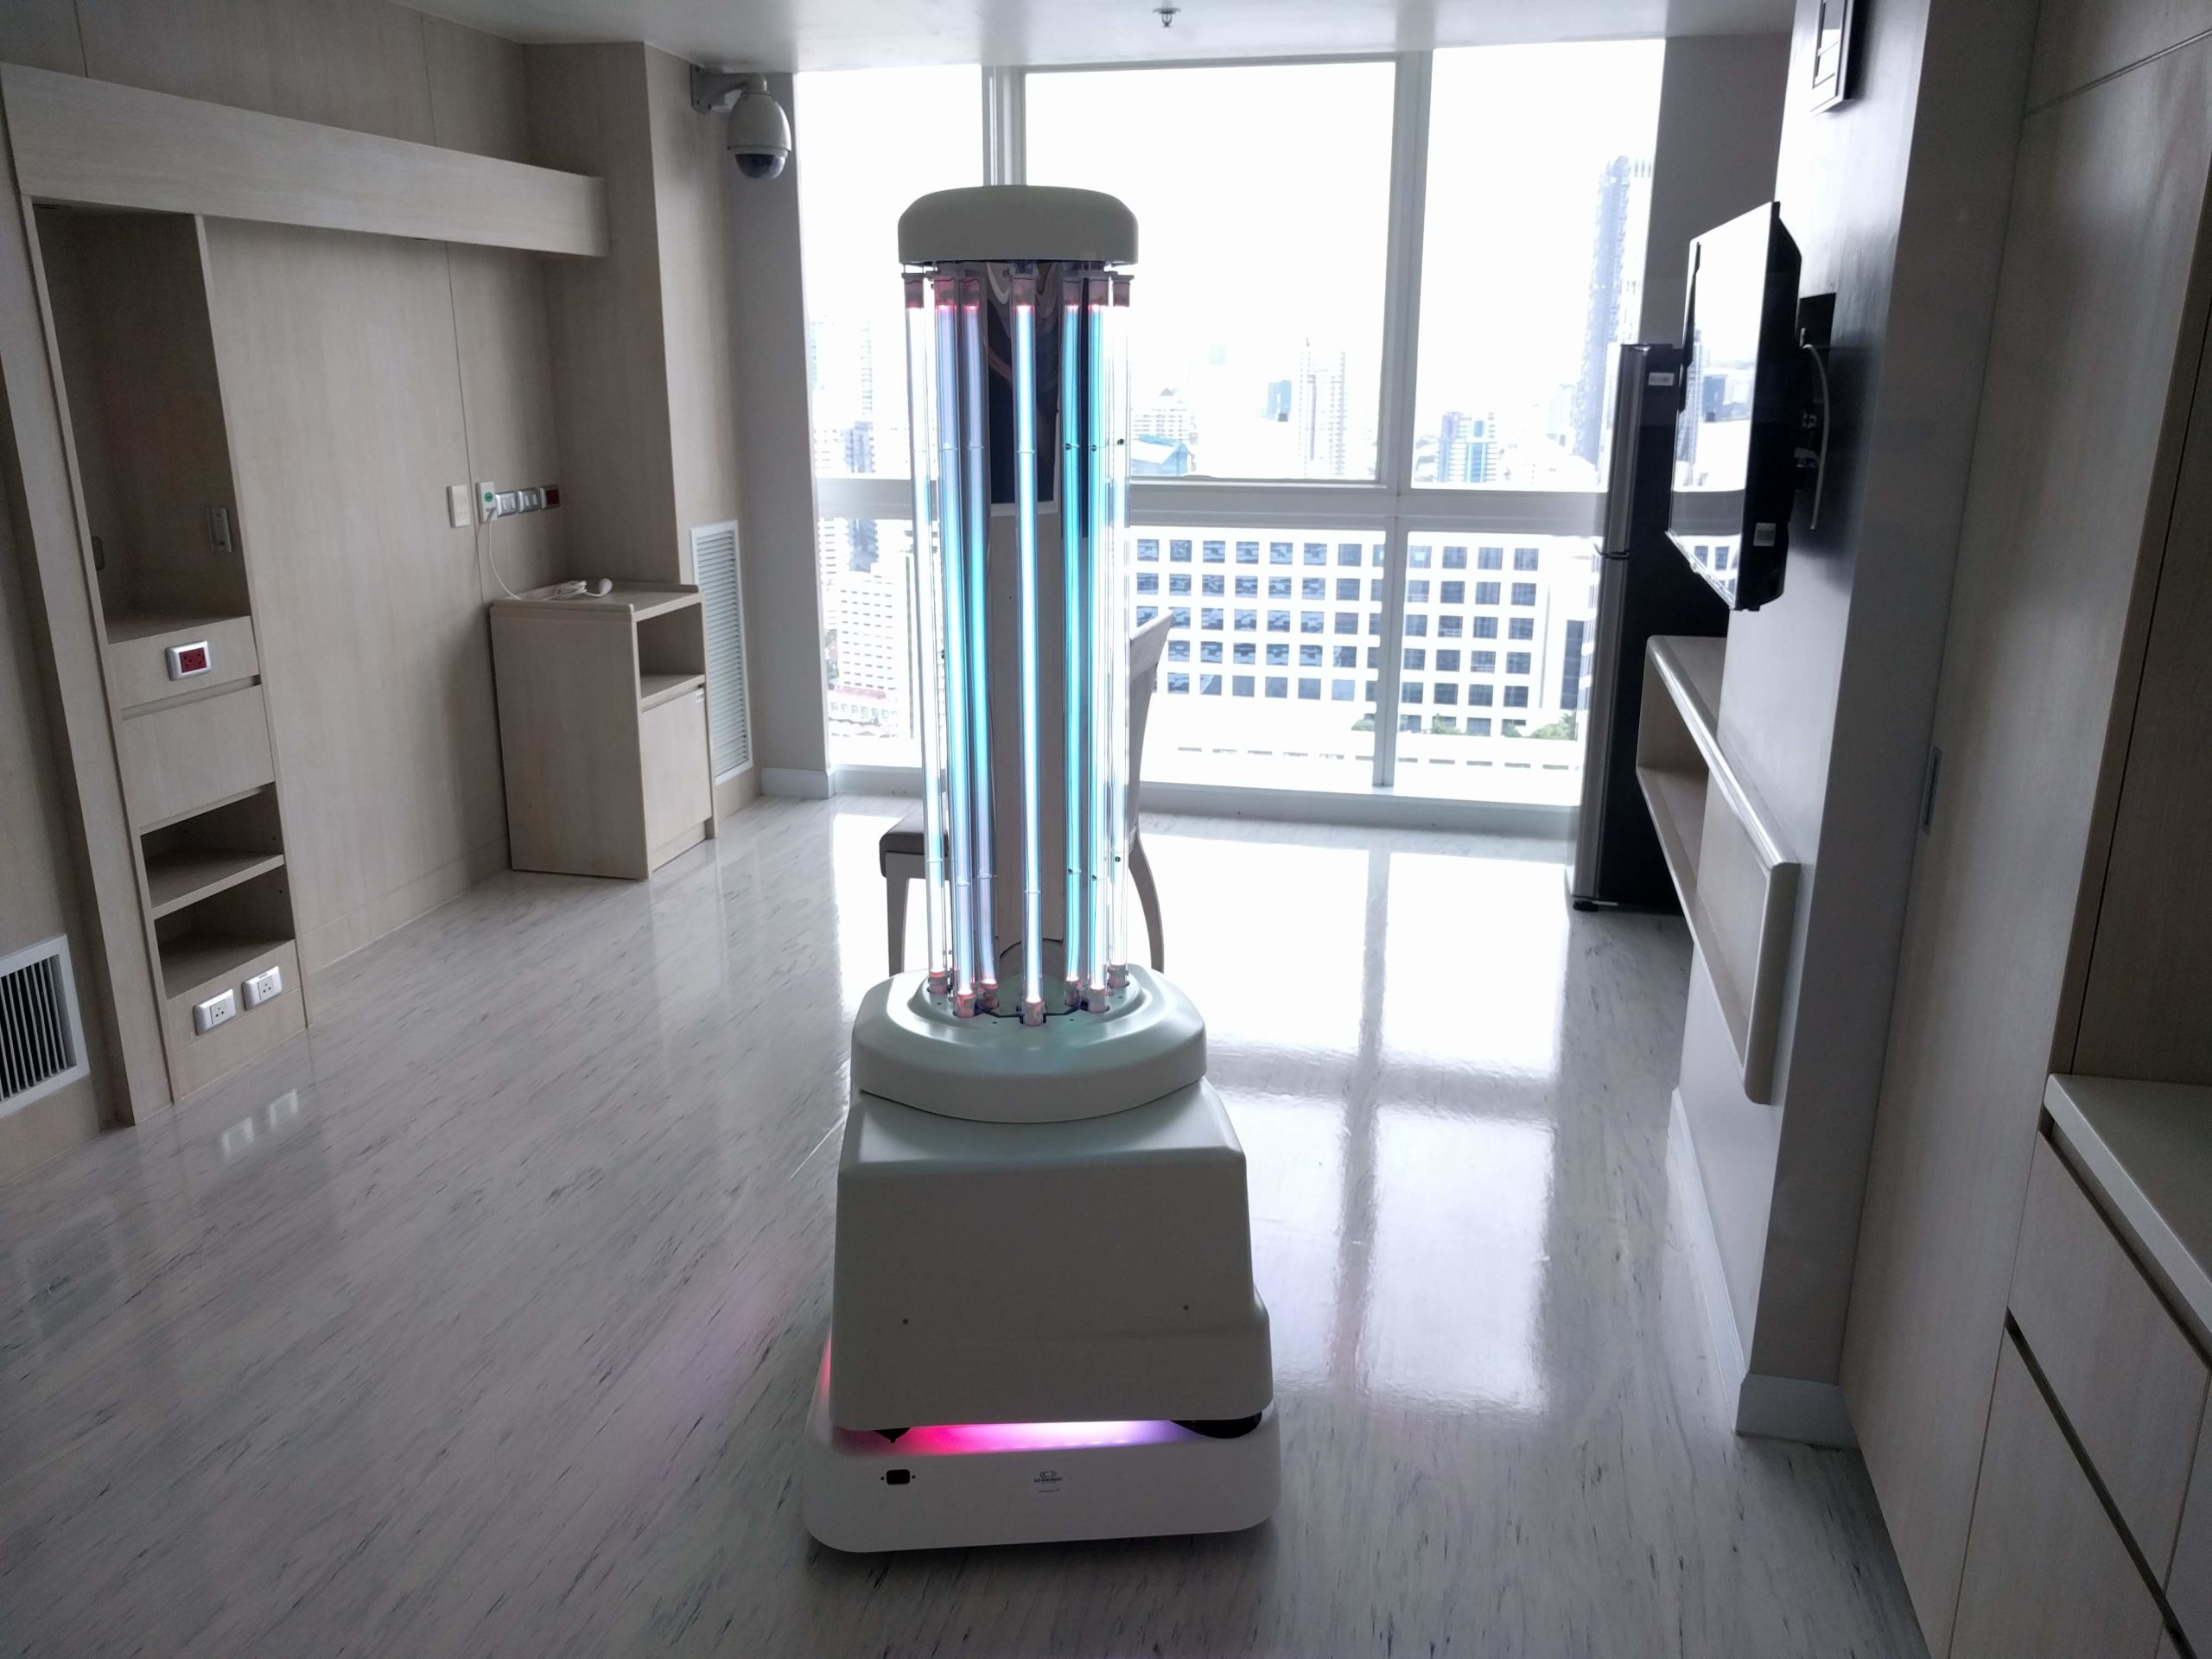 The Viability of Plused UV Disinfection Robot for Shower